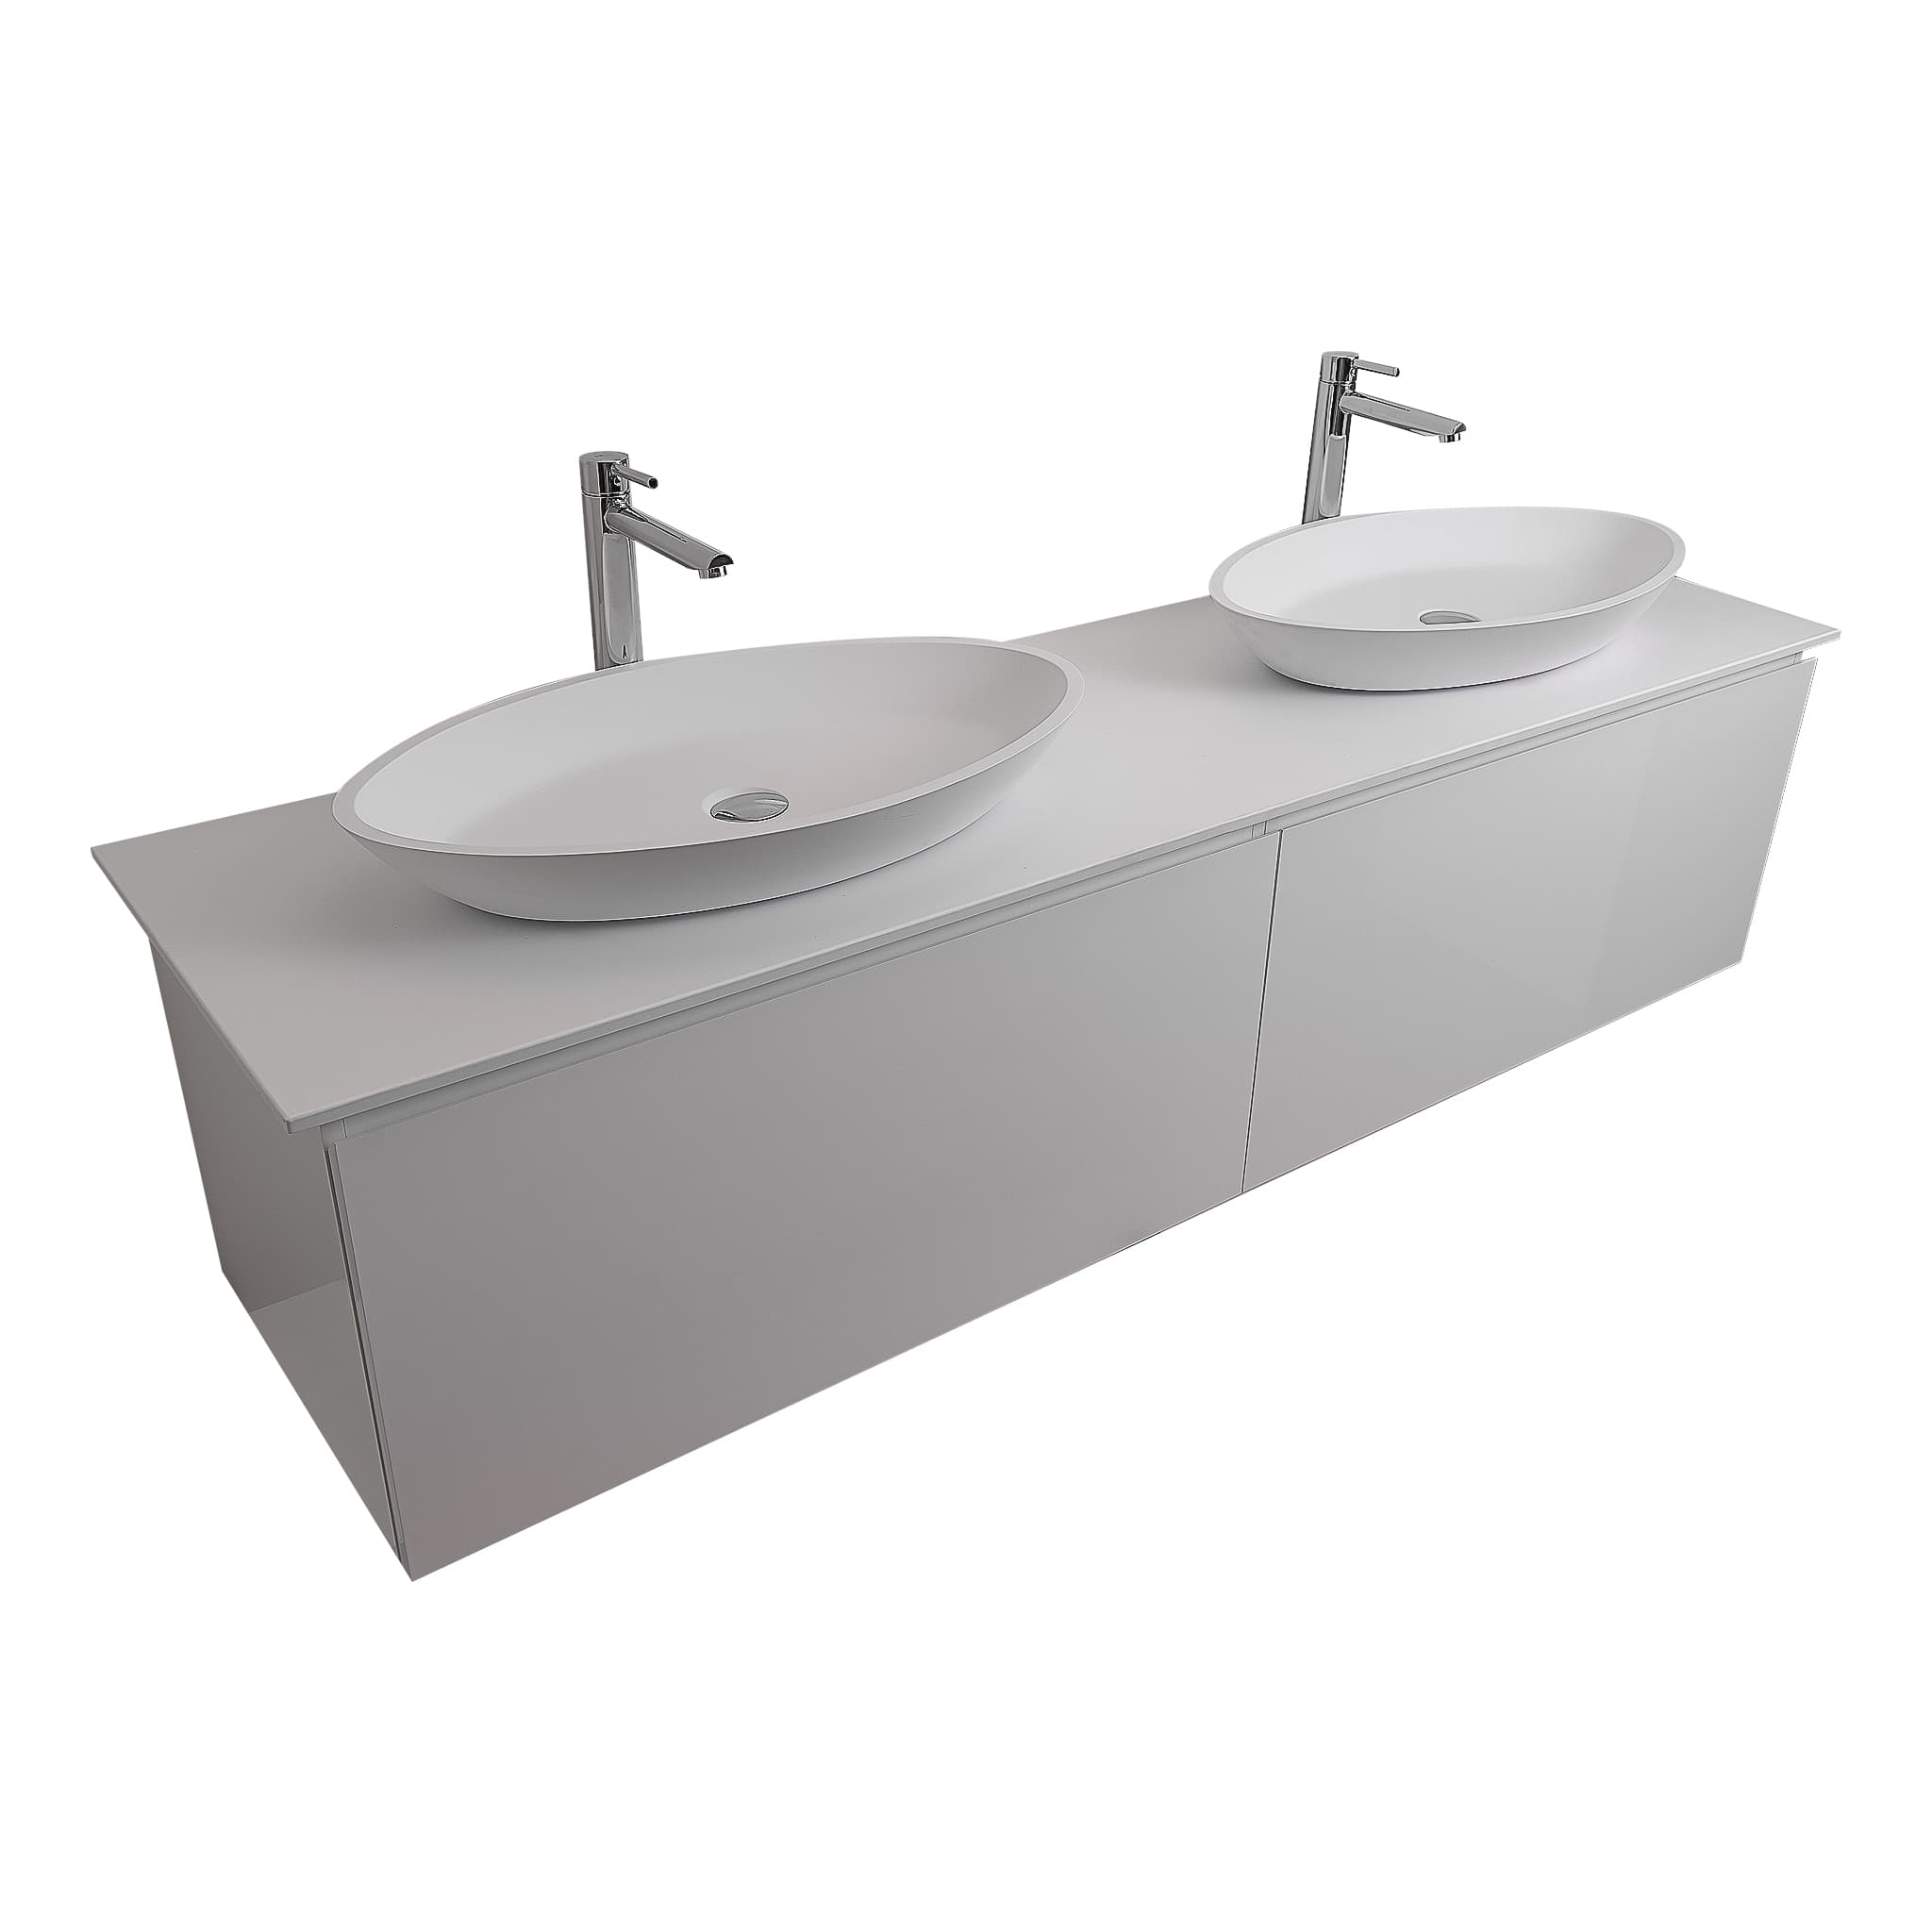 Venice 72 White High Gloss Cabinet, Solid Surface Flat White Counter And Two Oval Solid Surface White Basin 1305, Wall Mounted Modern Vanity Set